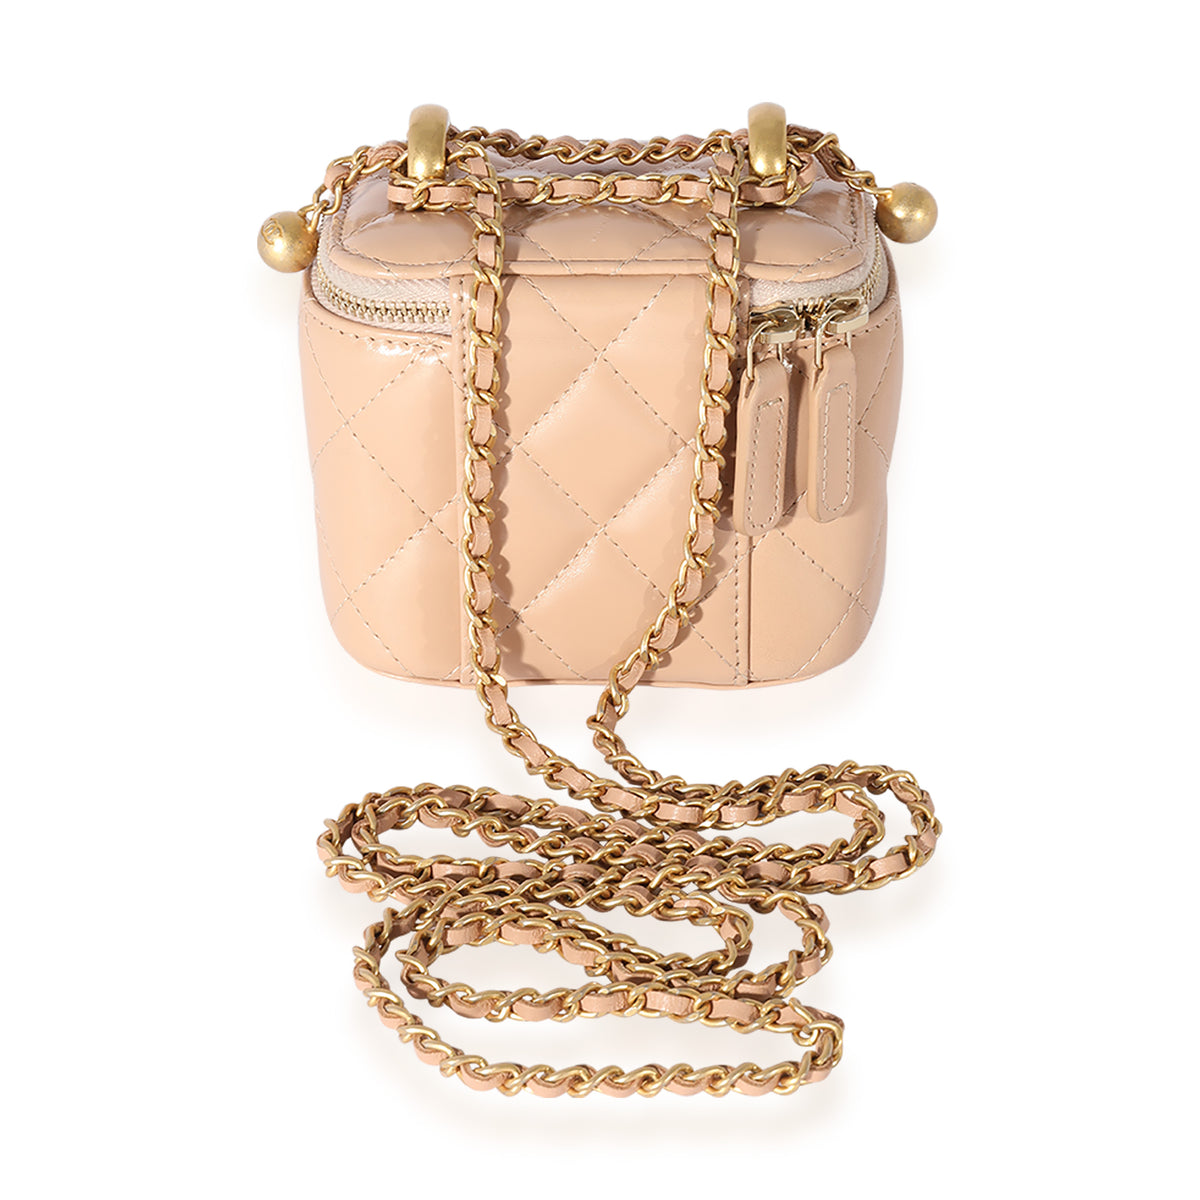 Chanel Pink Quilted Grained Calfskin Mini Vanity with Chain Gold Hardware, 2021, Womens Handbag